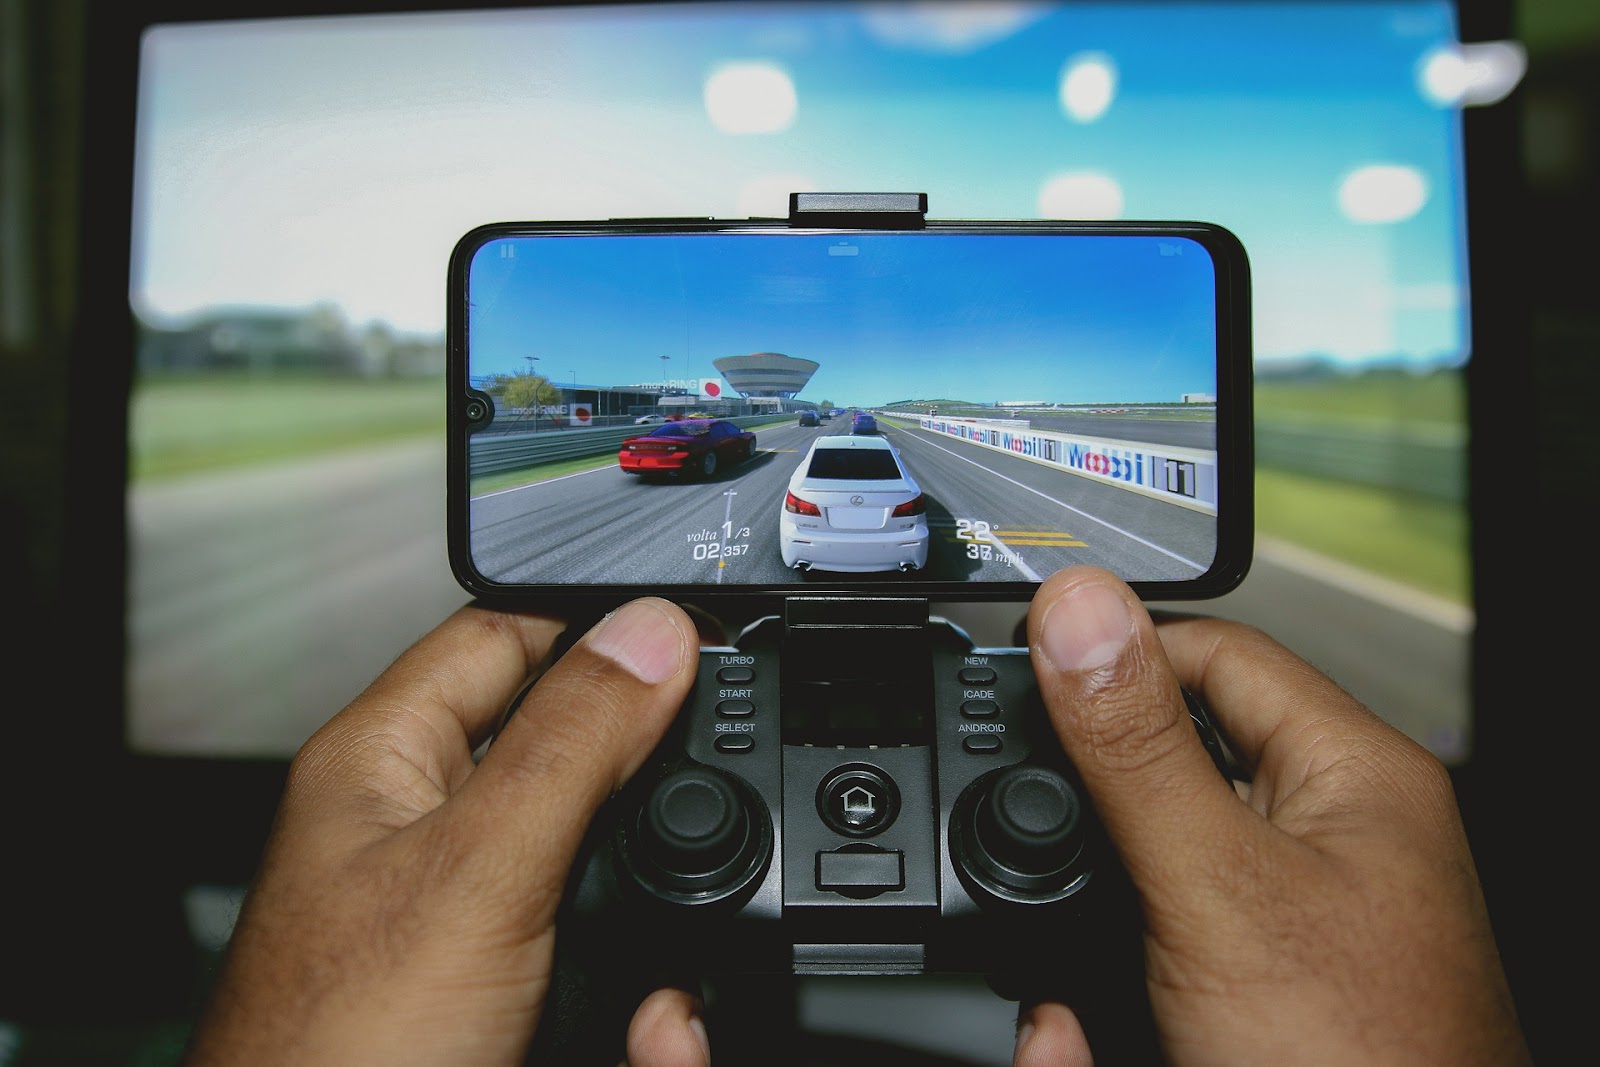 Playing a game on an Android using a gaming controller